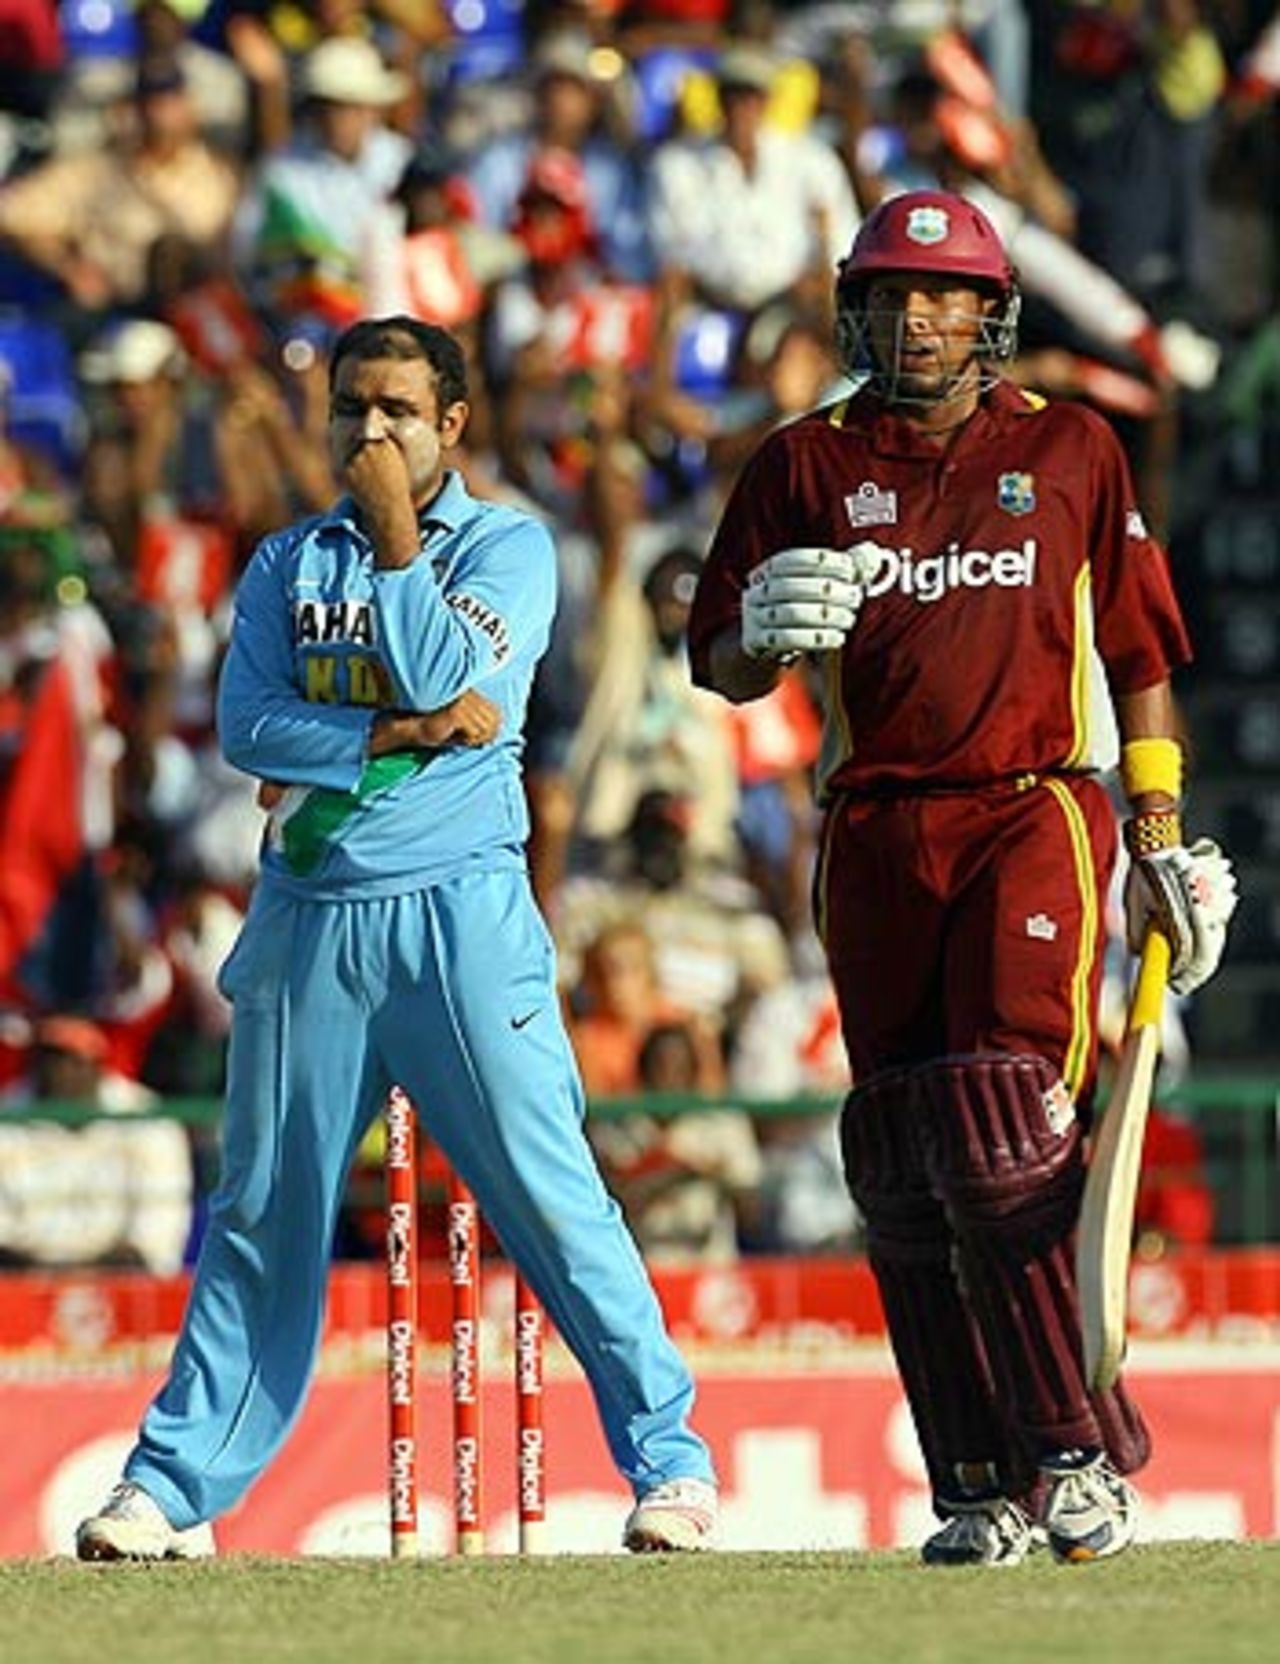 Virender Sehwag looks more than happy to see Ramnaresh Sarwan get a hundred, West Indies v India, 3rd ODI, St Kitts, May 23, 2006